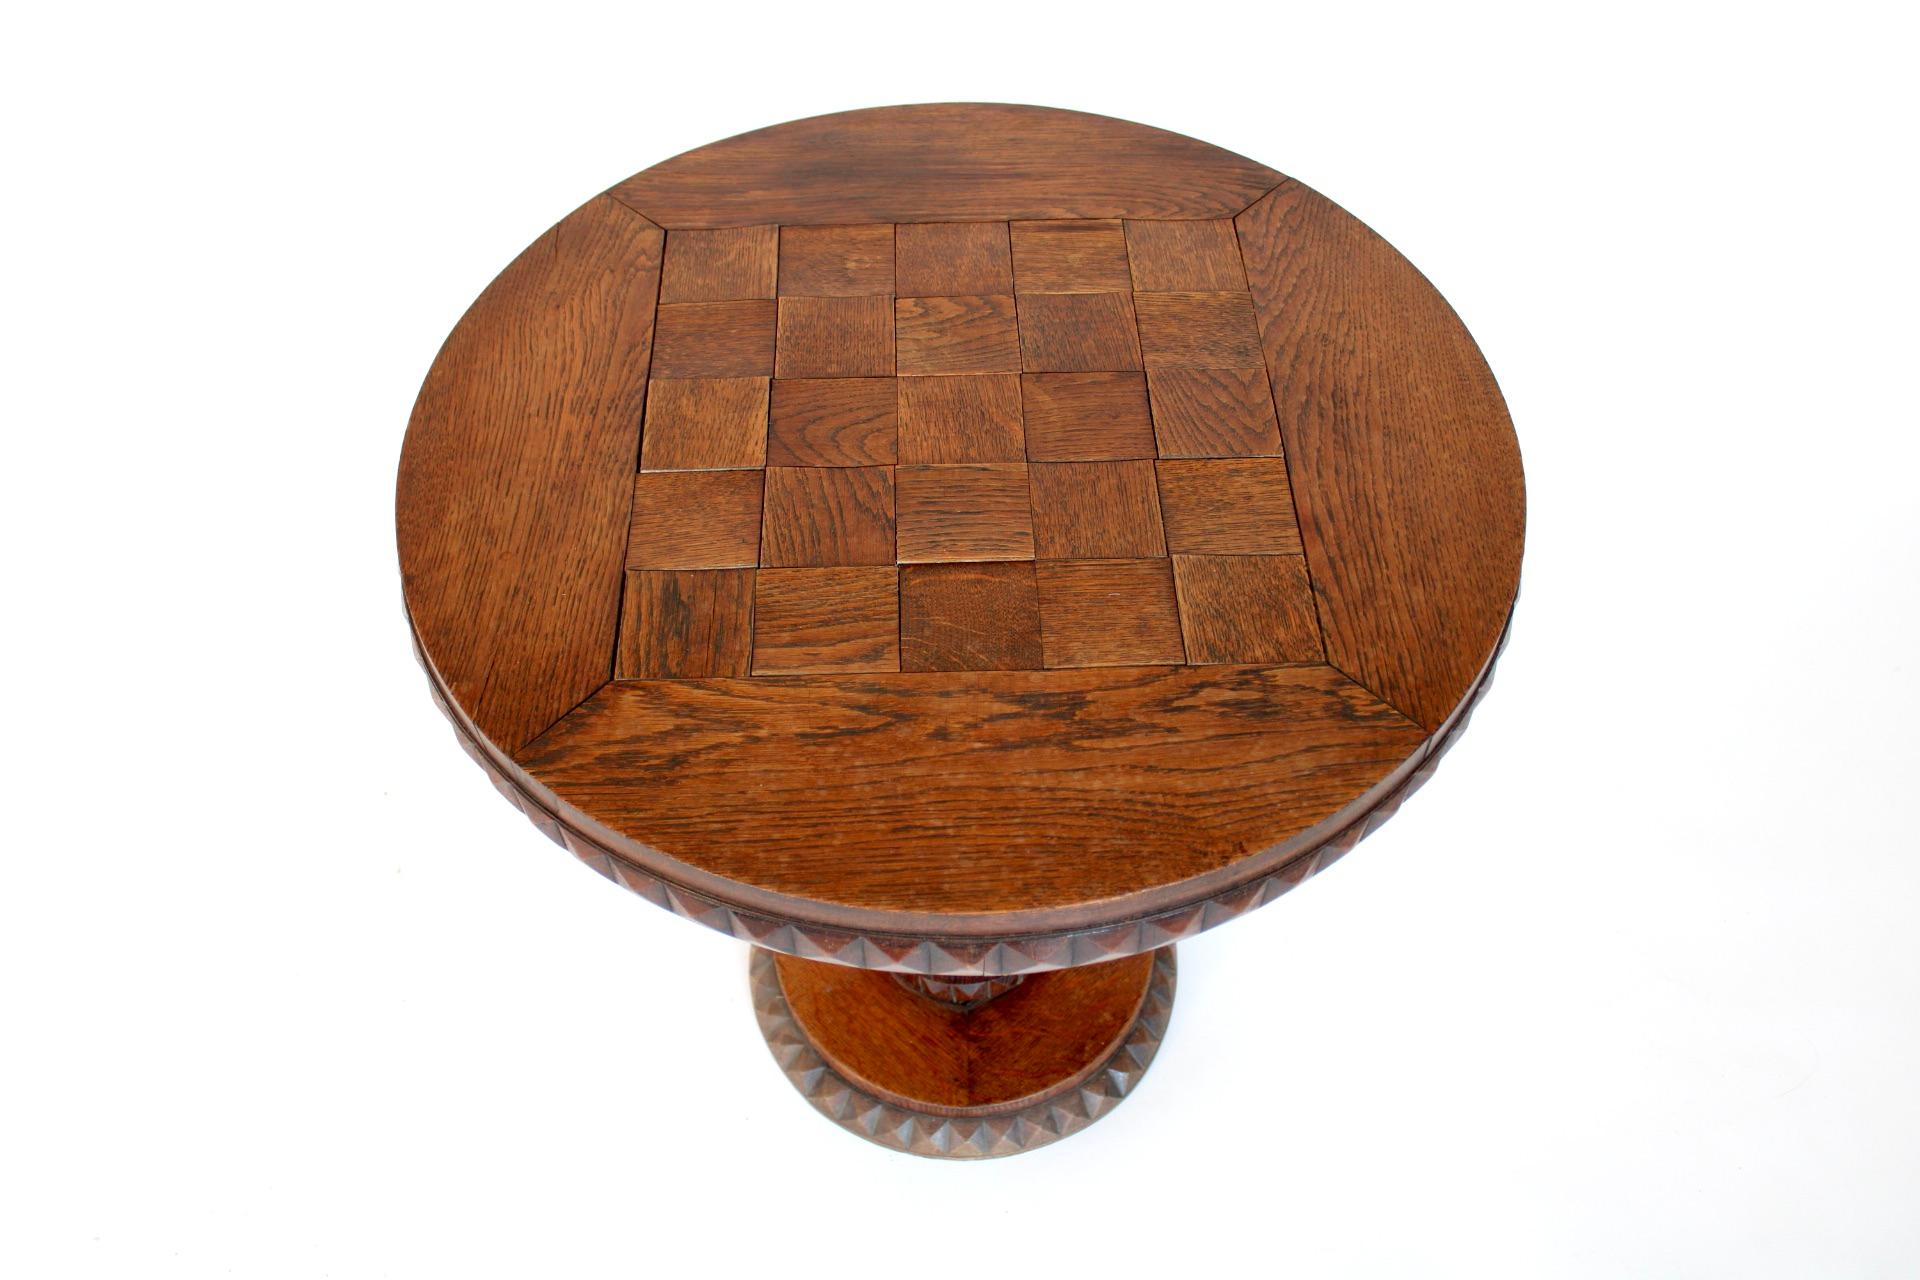 French Oak Side Carved Table Art Deco Africanist Influence Attributed to Dudouyt For Sale 1